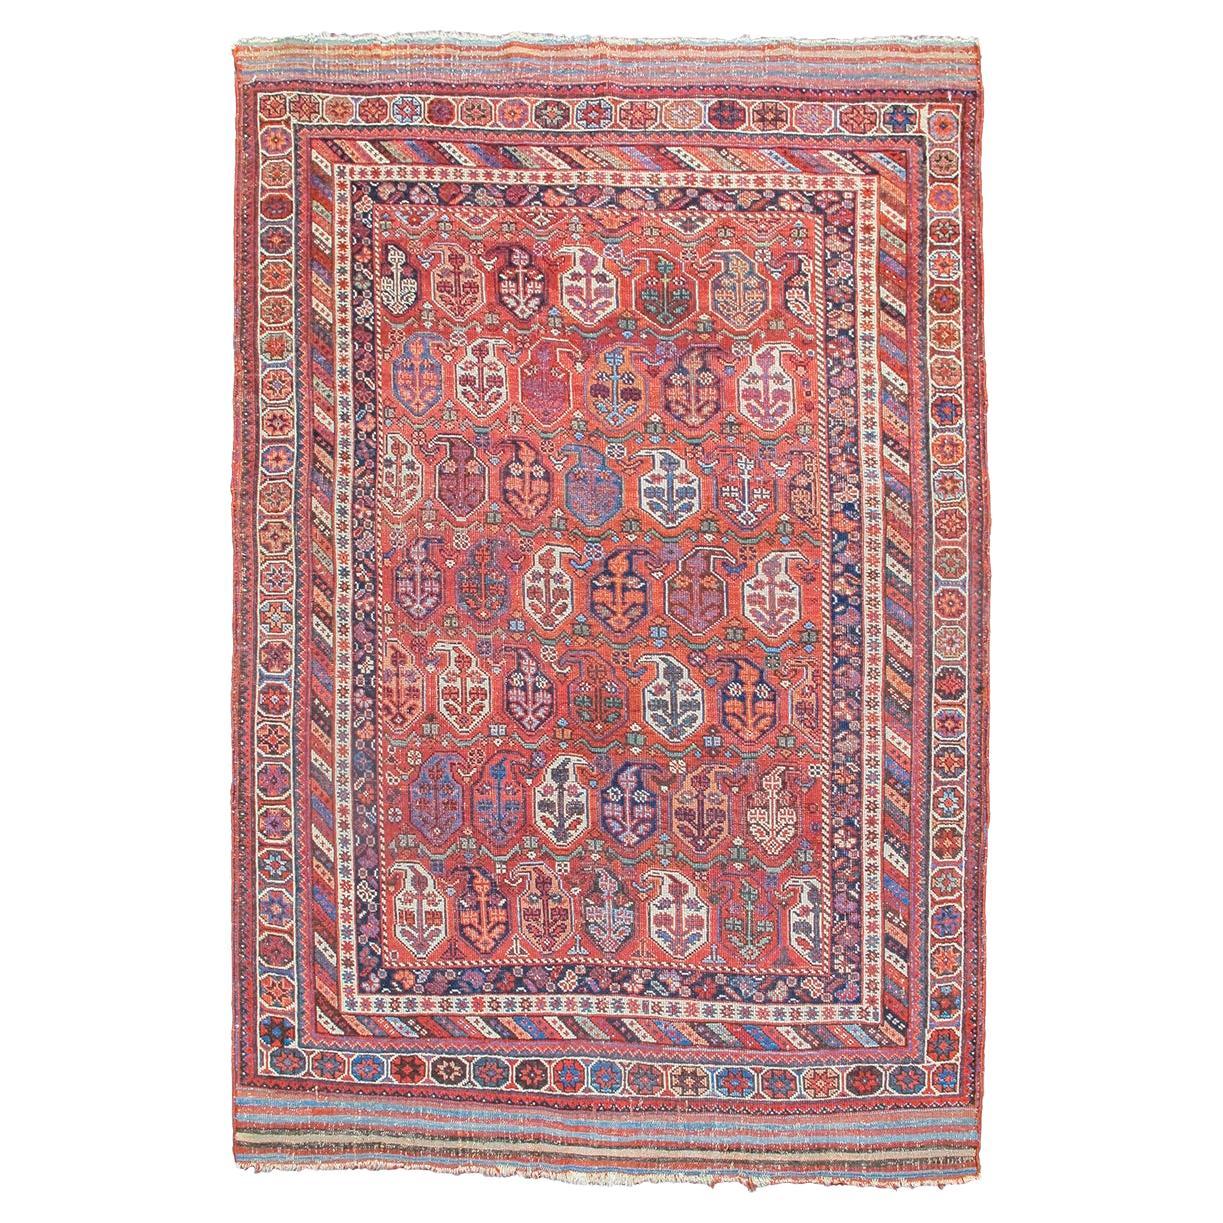 Antique Persian Afshar Rug, Late 19th Century